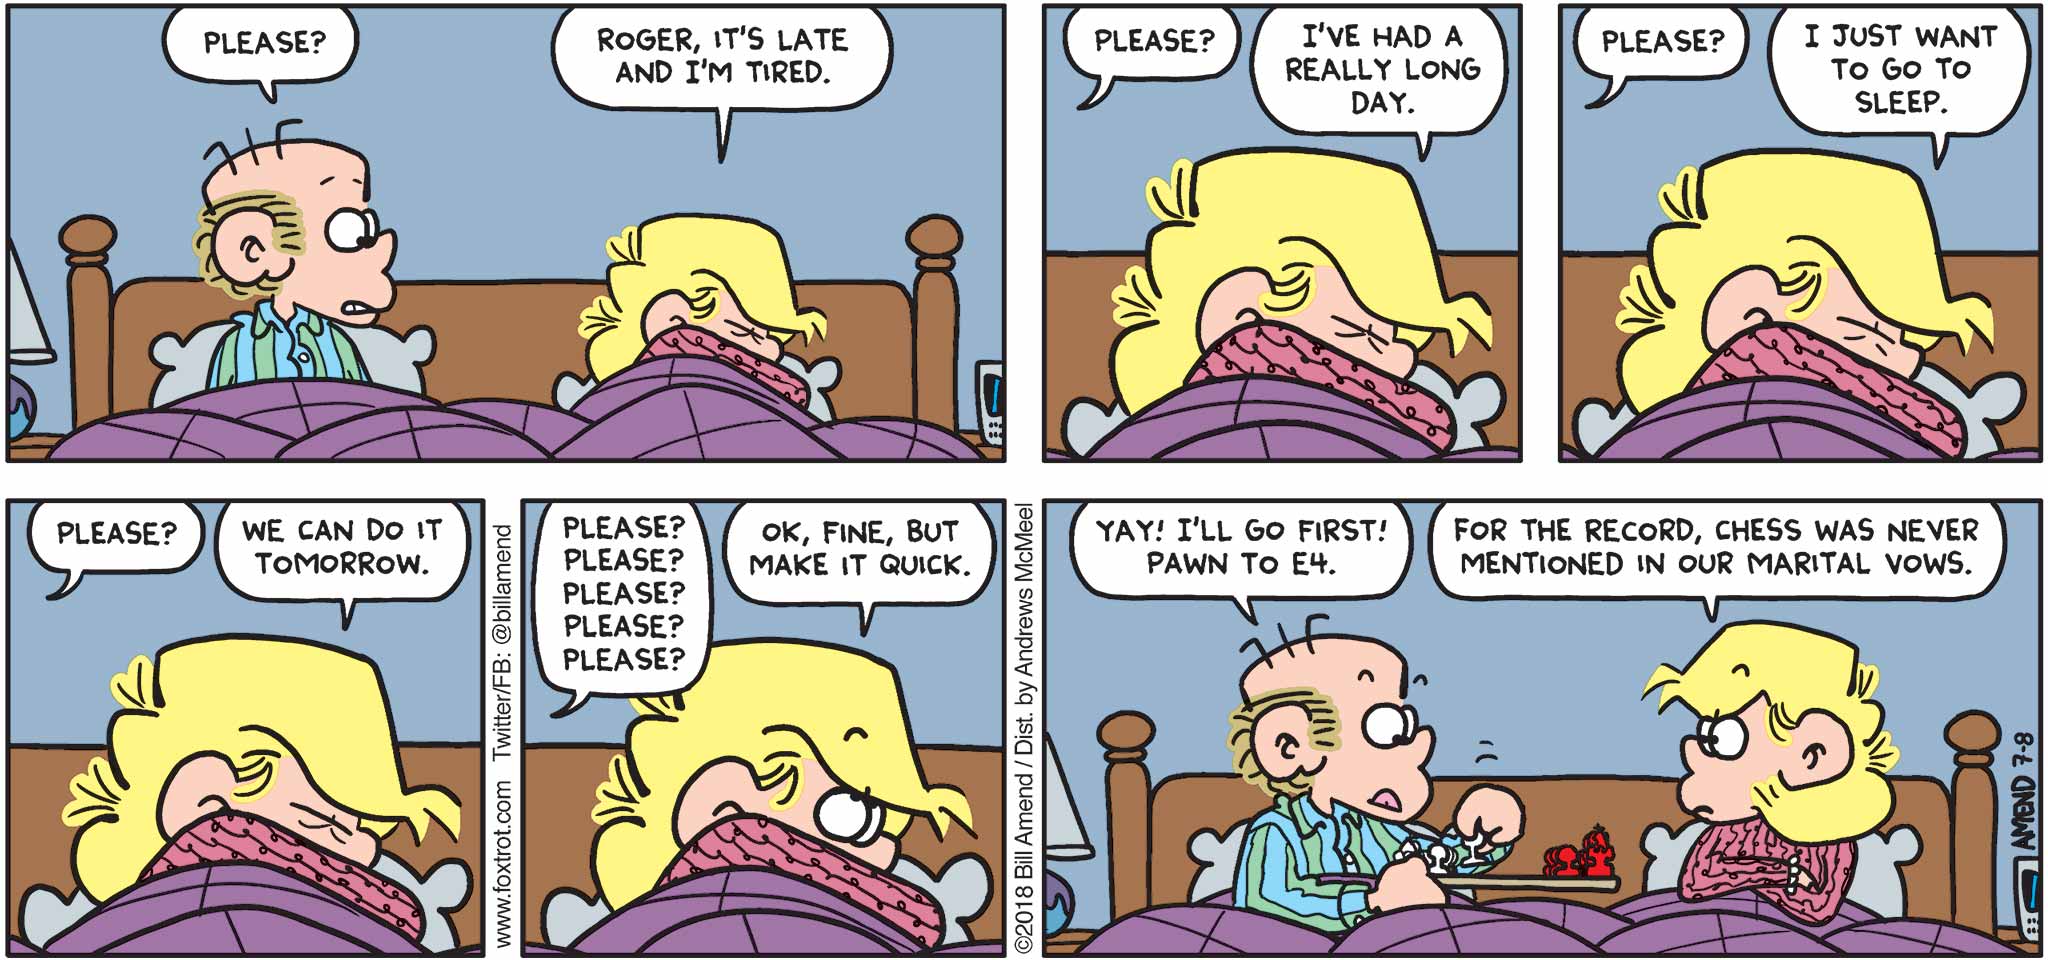 FoxTrot by Bill Amend - "Make It Quick" published July 8, 2018 - Roger says: Please? Andy says: Roger, it's late and I'm tired. Roger says: Please? Andy says: I've had a really long day. Roger says: Please? Andy says: I just want to go to sleep. Roger says: Please? Andy says: We can do it tomorrow. Roger says: Please? Please? Please? Please? Please? Andy says: Ok, fine, but make it quick. Roger says: Yay! I'll go first! Pawn to E4. Andy says: For the record, chess was never mentioned in our marital vows.